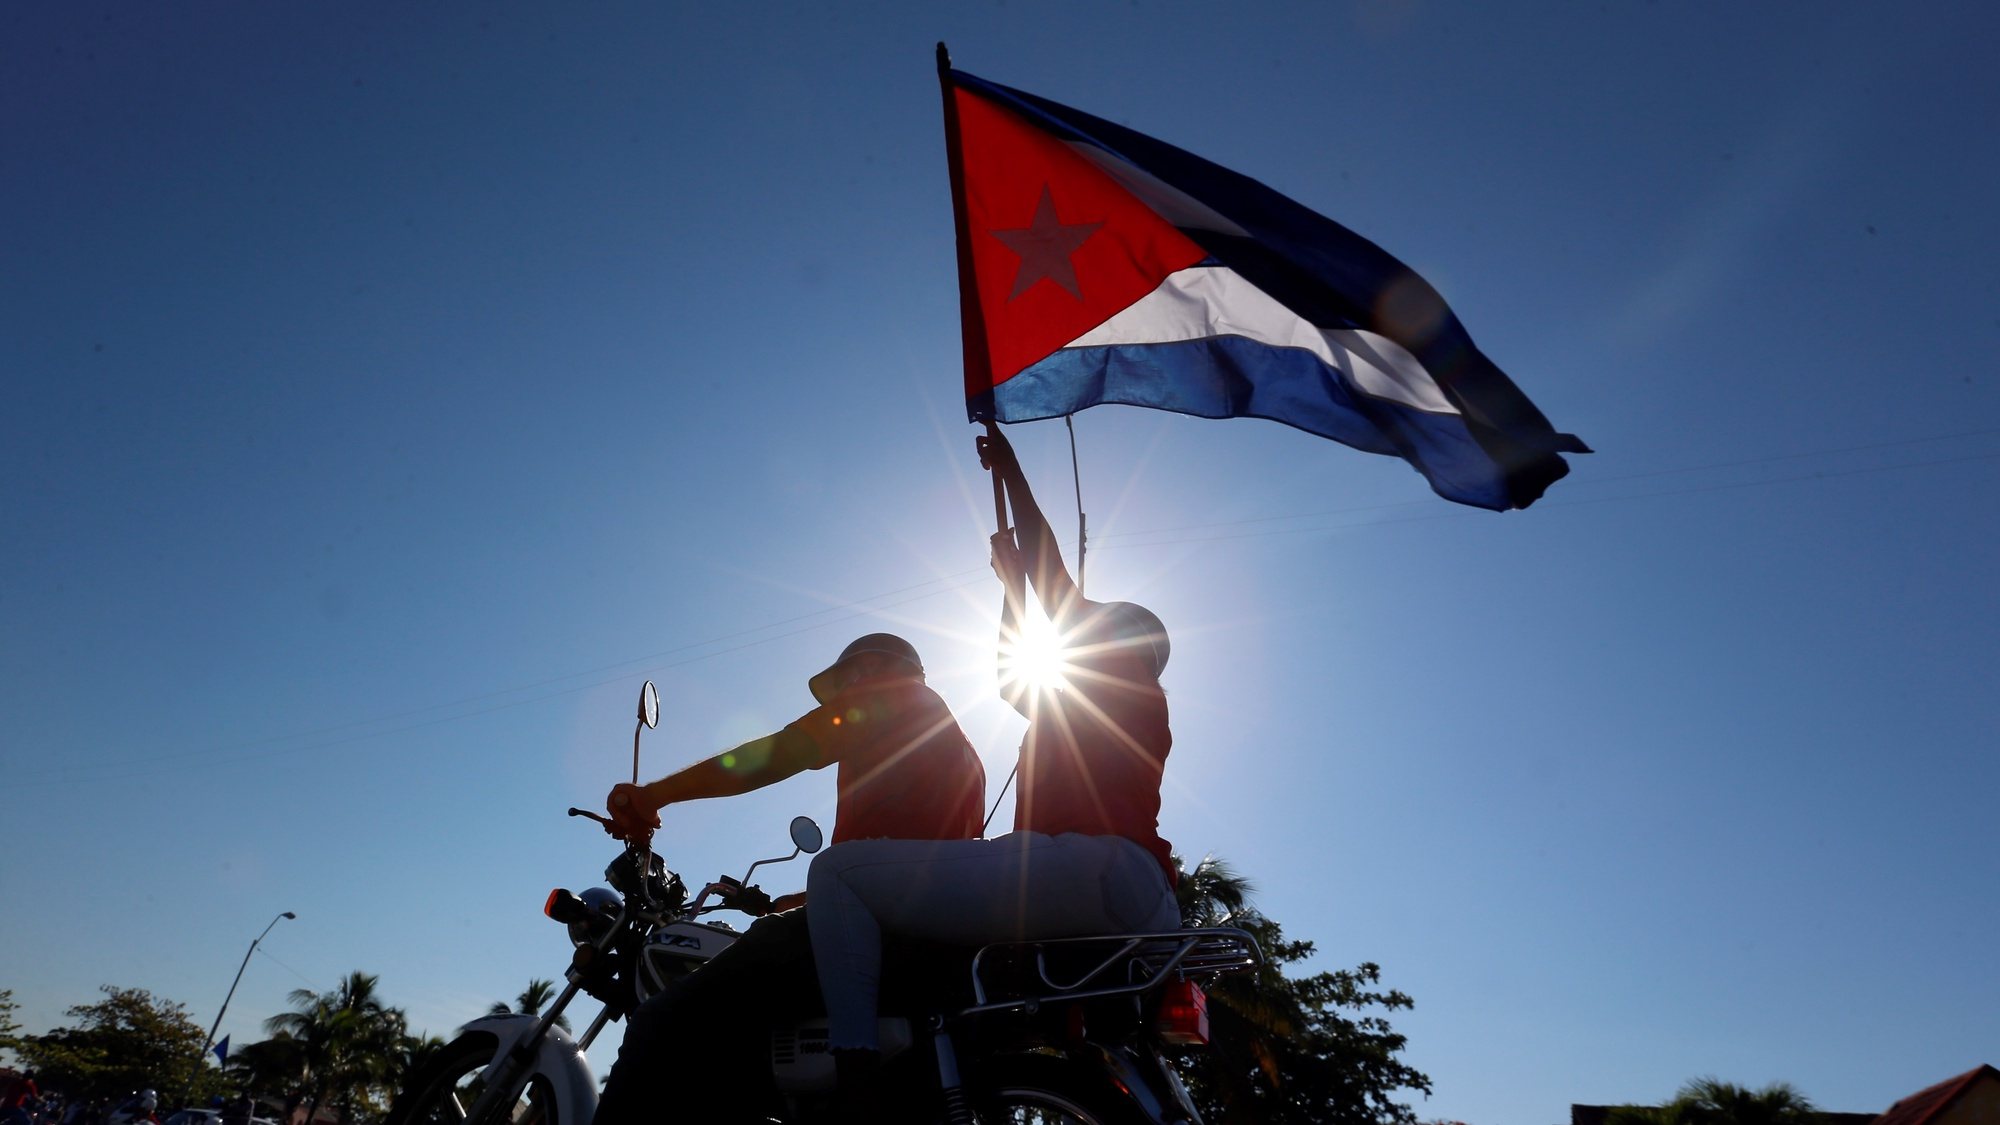 epaselect epa09238177 Bikers arrive to attend a nautical regatta in Cienfuegos, Cuba, 30 May 2021. Citizens and representatives of the Union of Young Communists of Cuba (UJC) demanded the lifting of the United States embargo with a regatta in the Bay of Cienfuegos, 230 kilometers east of Havana, where a similar event took place in April.  EPA/Ernesto Mastrascusa